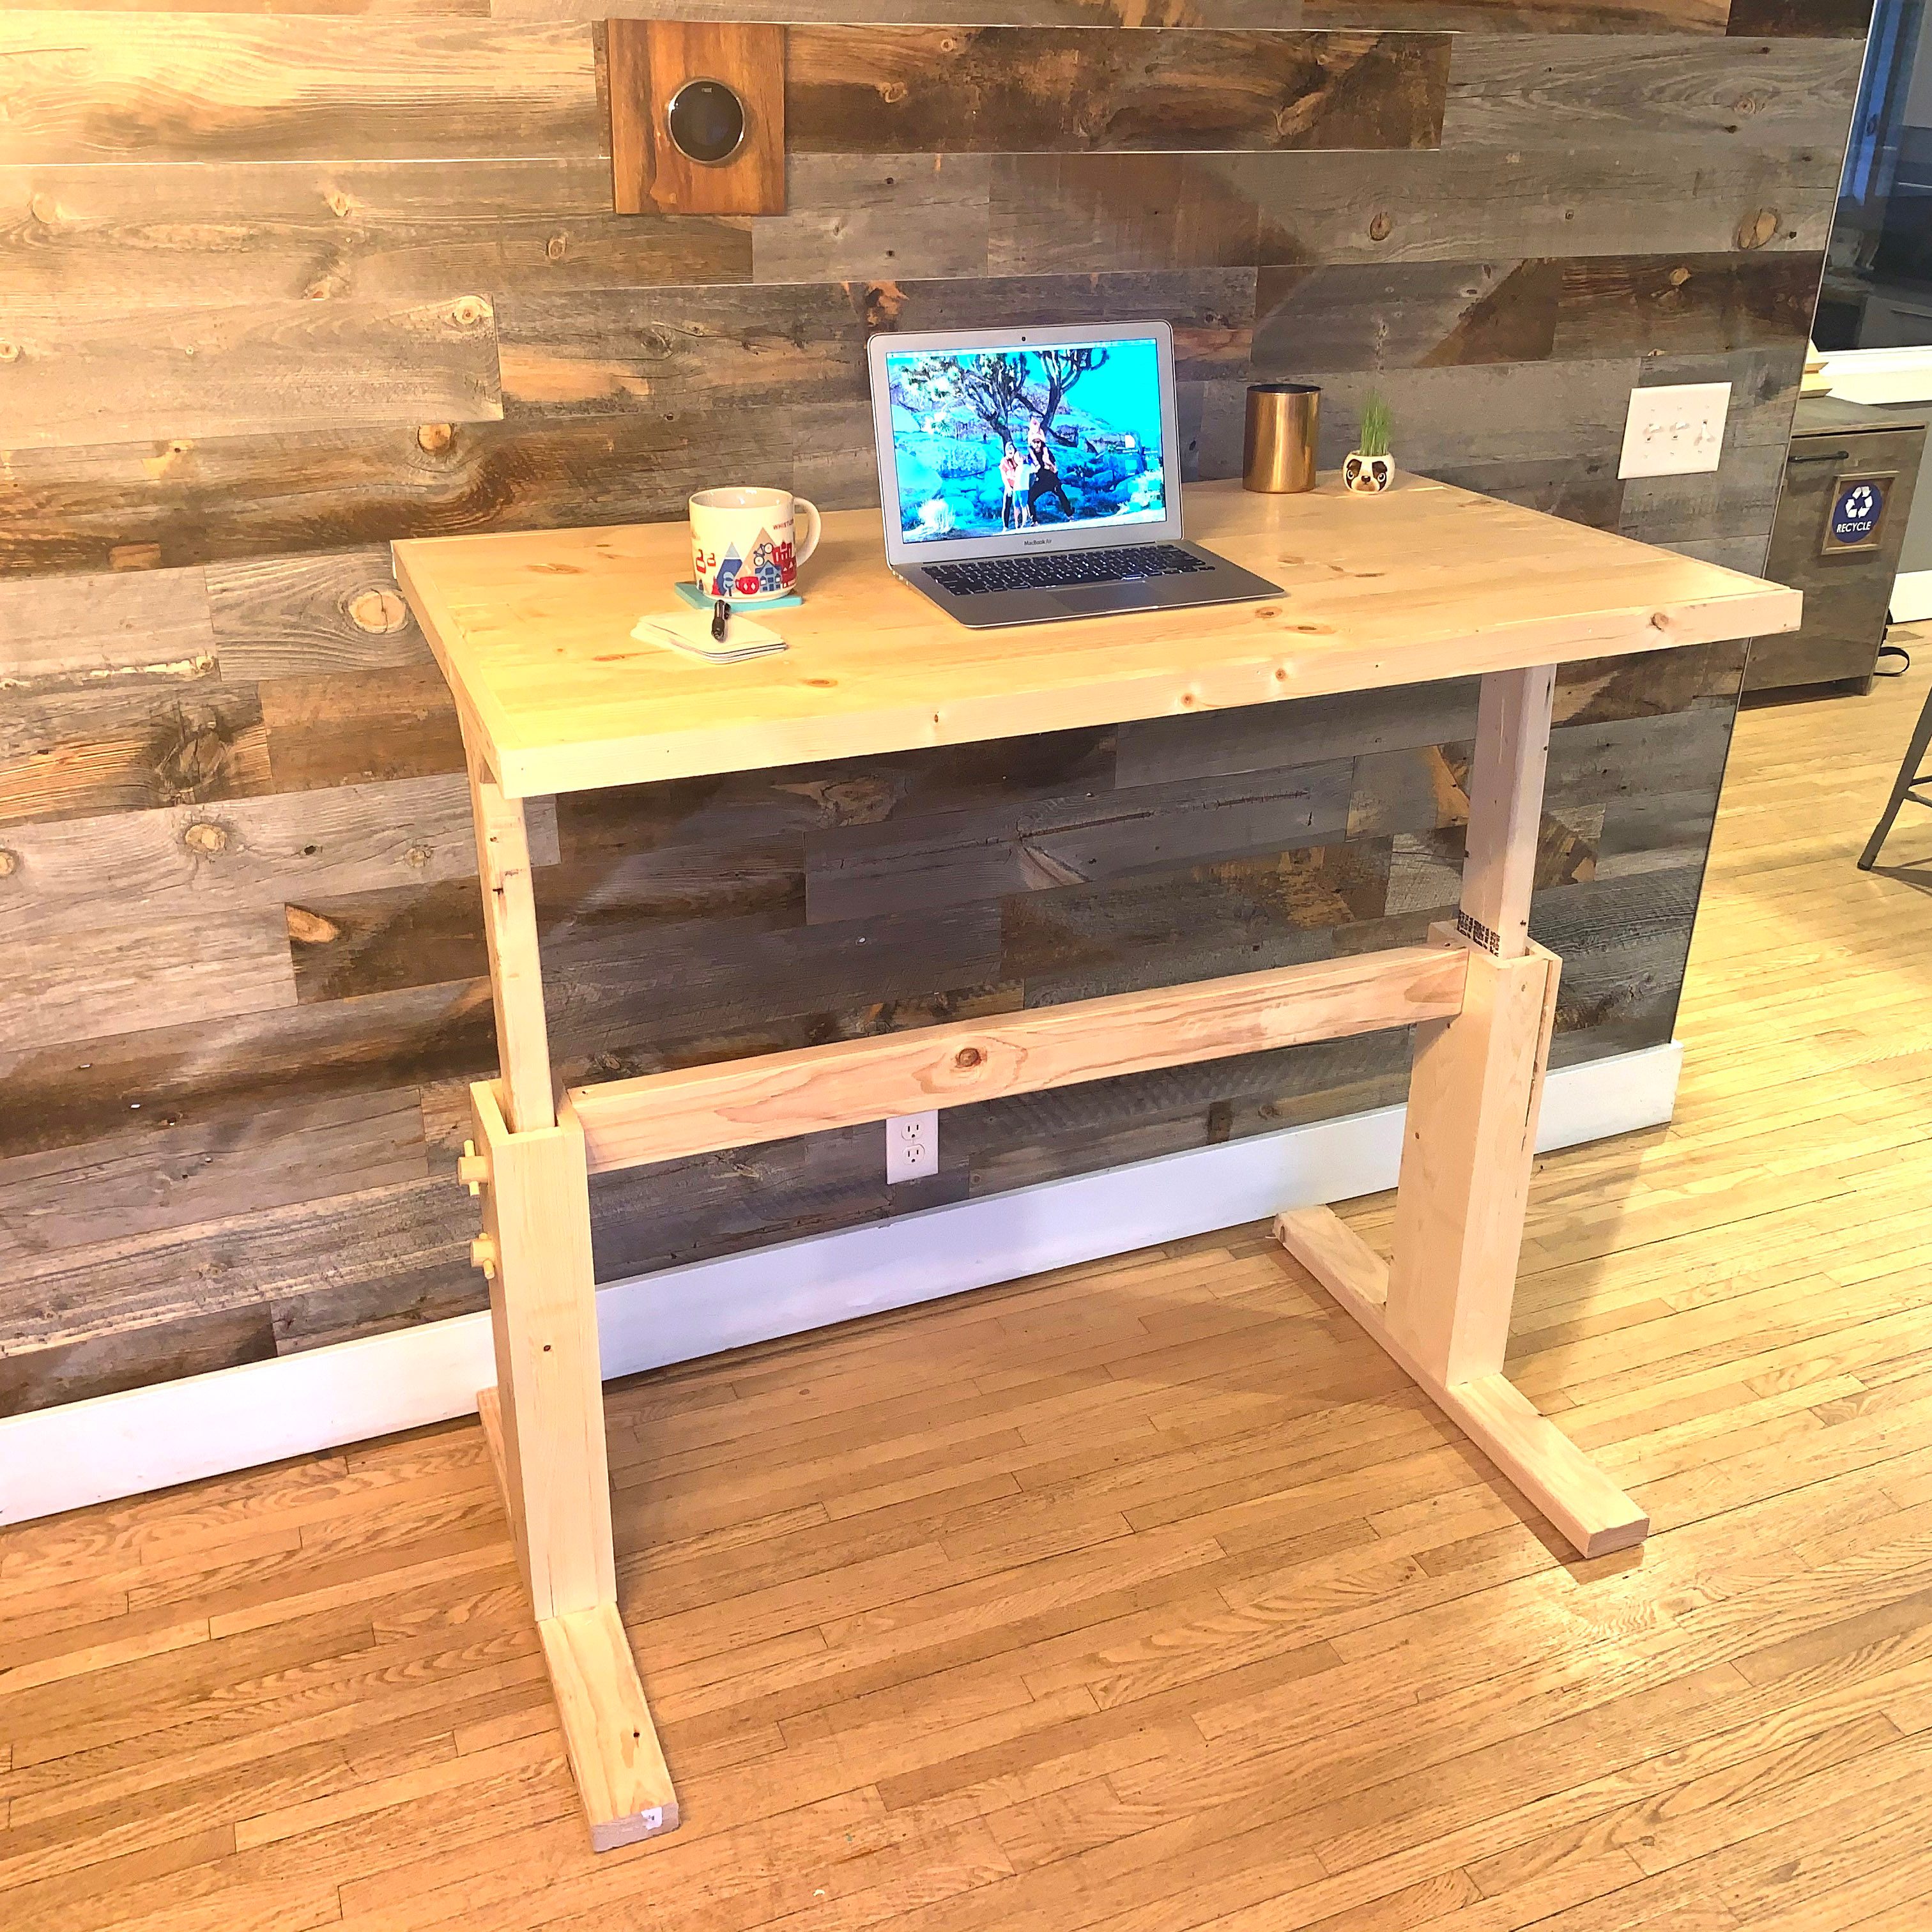 Sit Or Stand How To Make Your Own Adjustable Diy Desk The